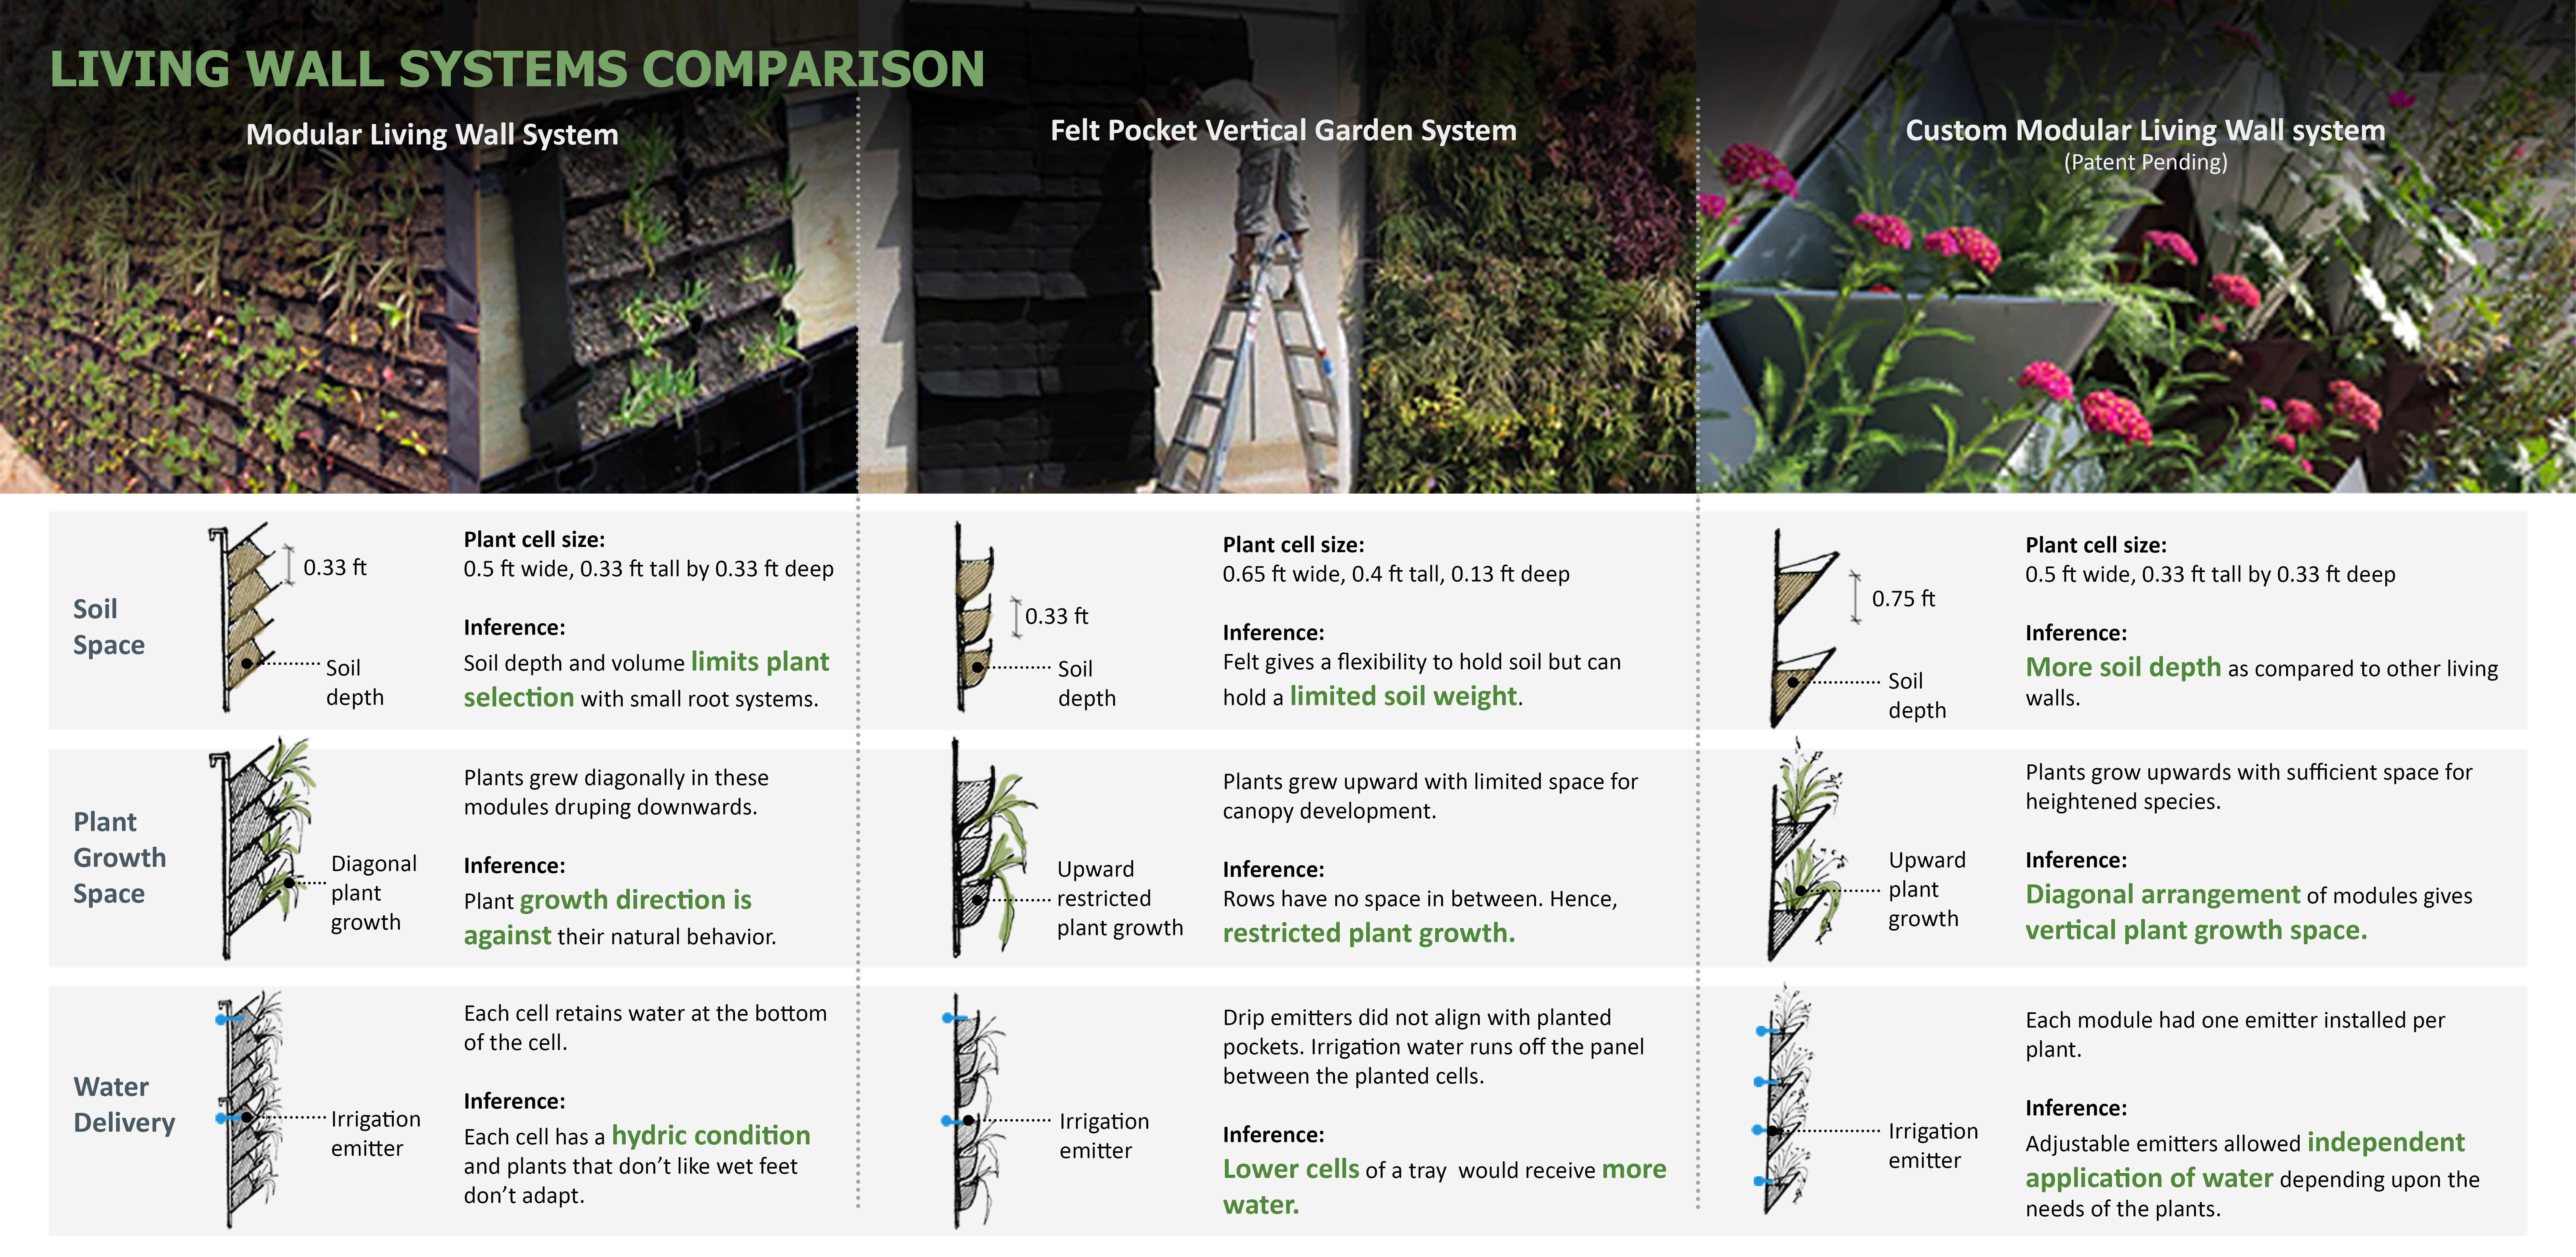 Living Wall Systems Comparison